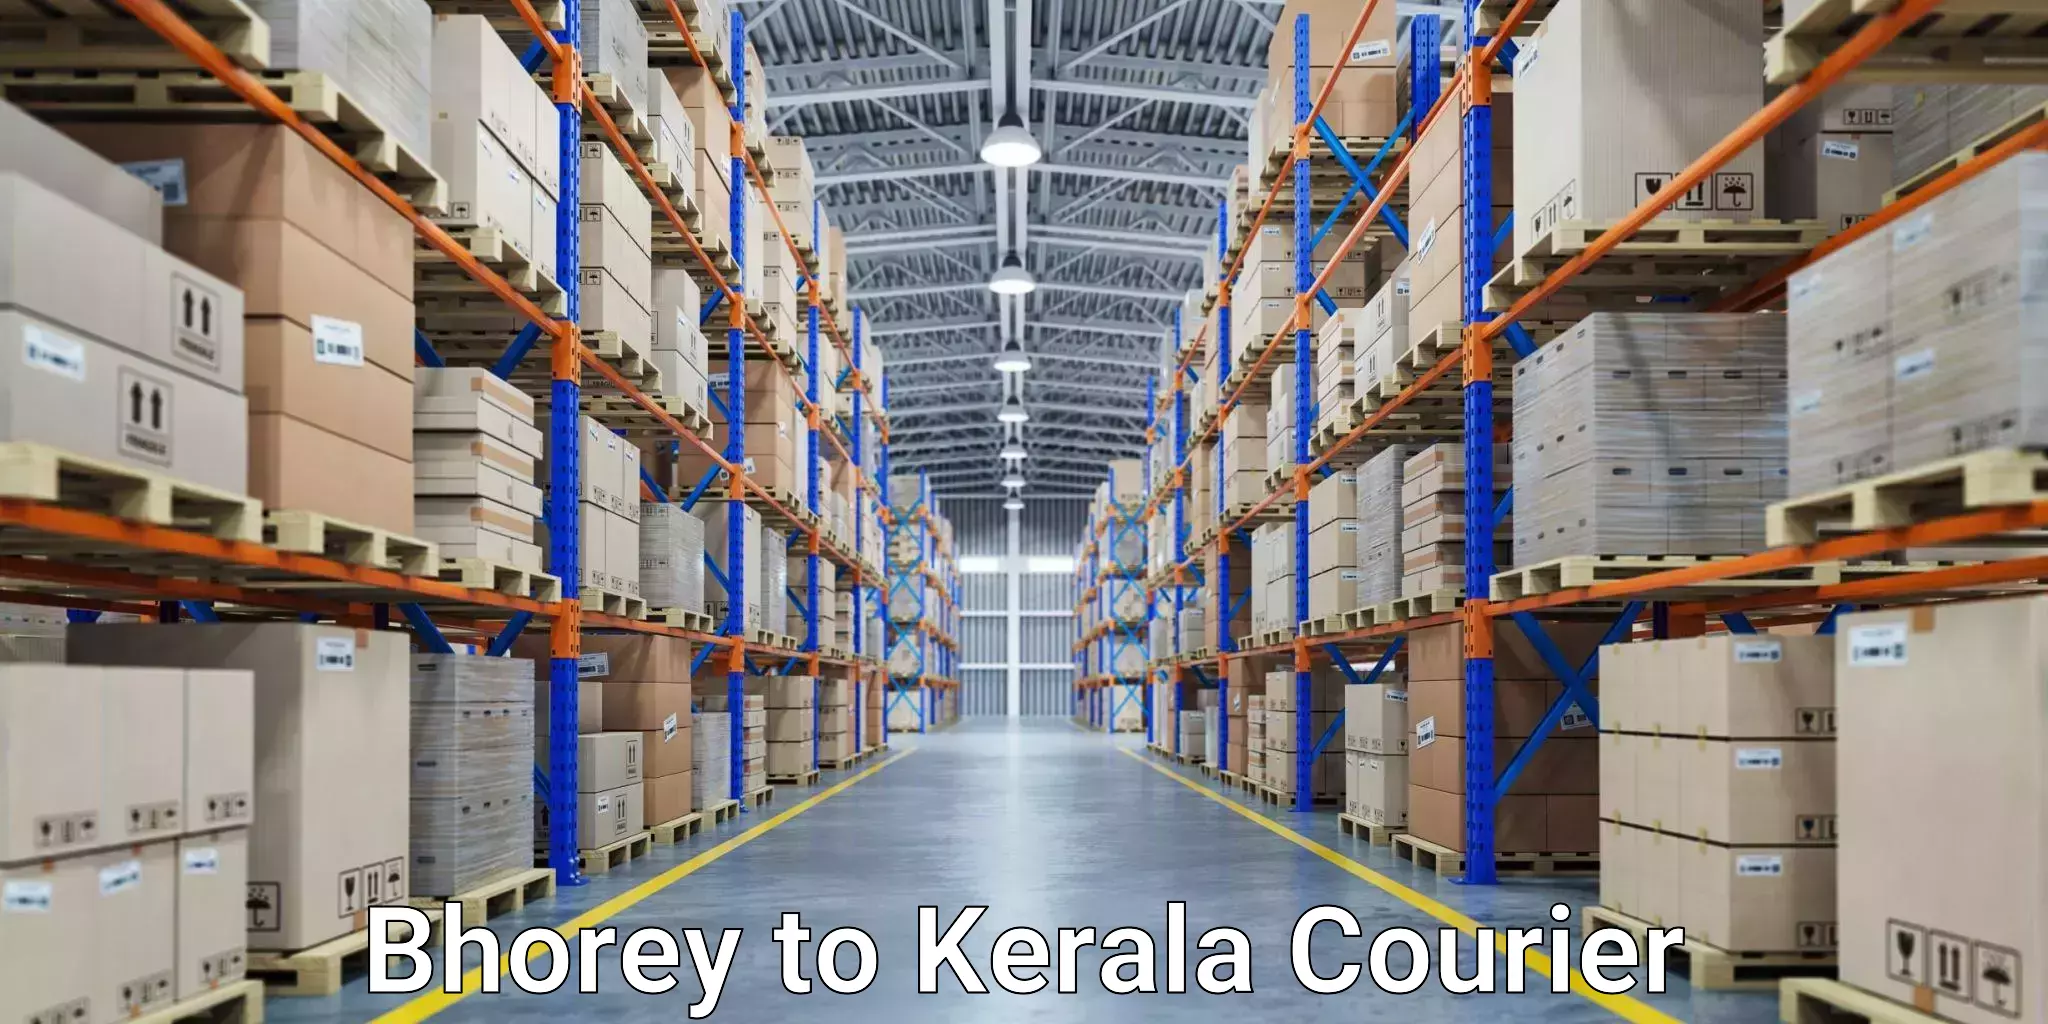 Courier service comparison Bhorey to IIT Palakkad